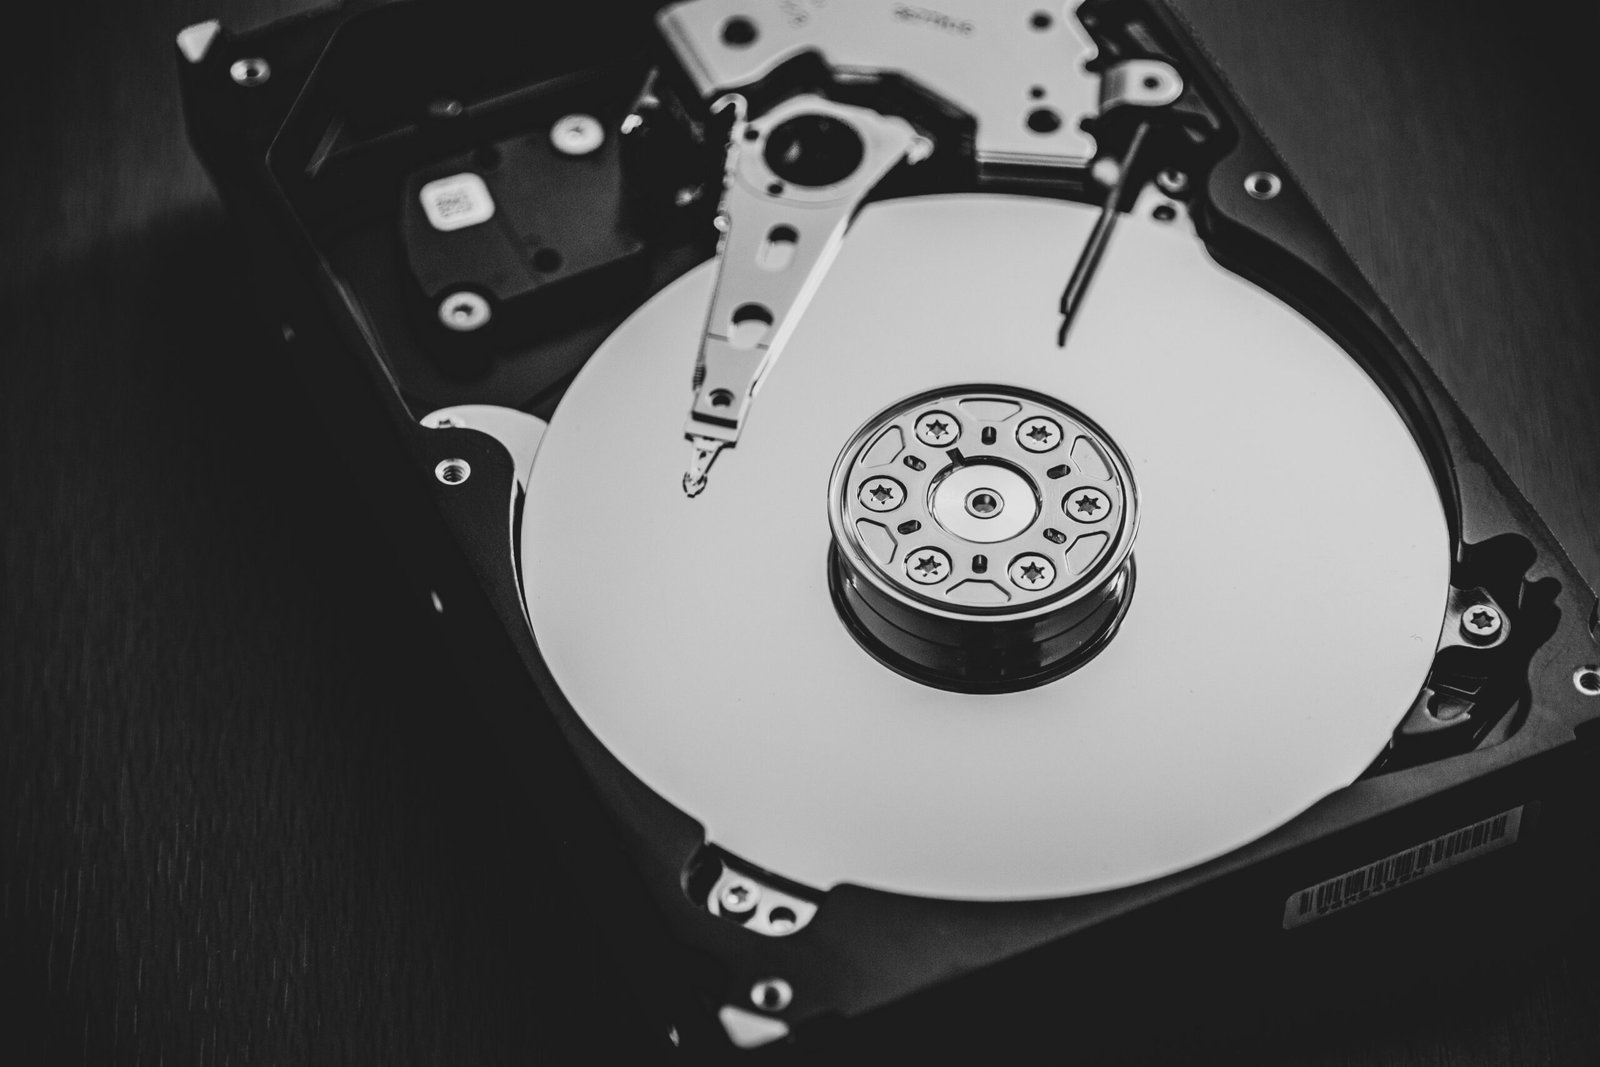 Does hard drive wiping completely remove data?